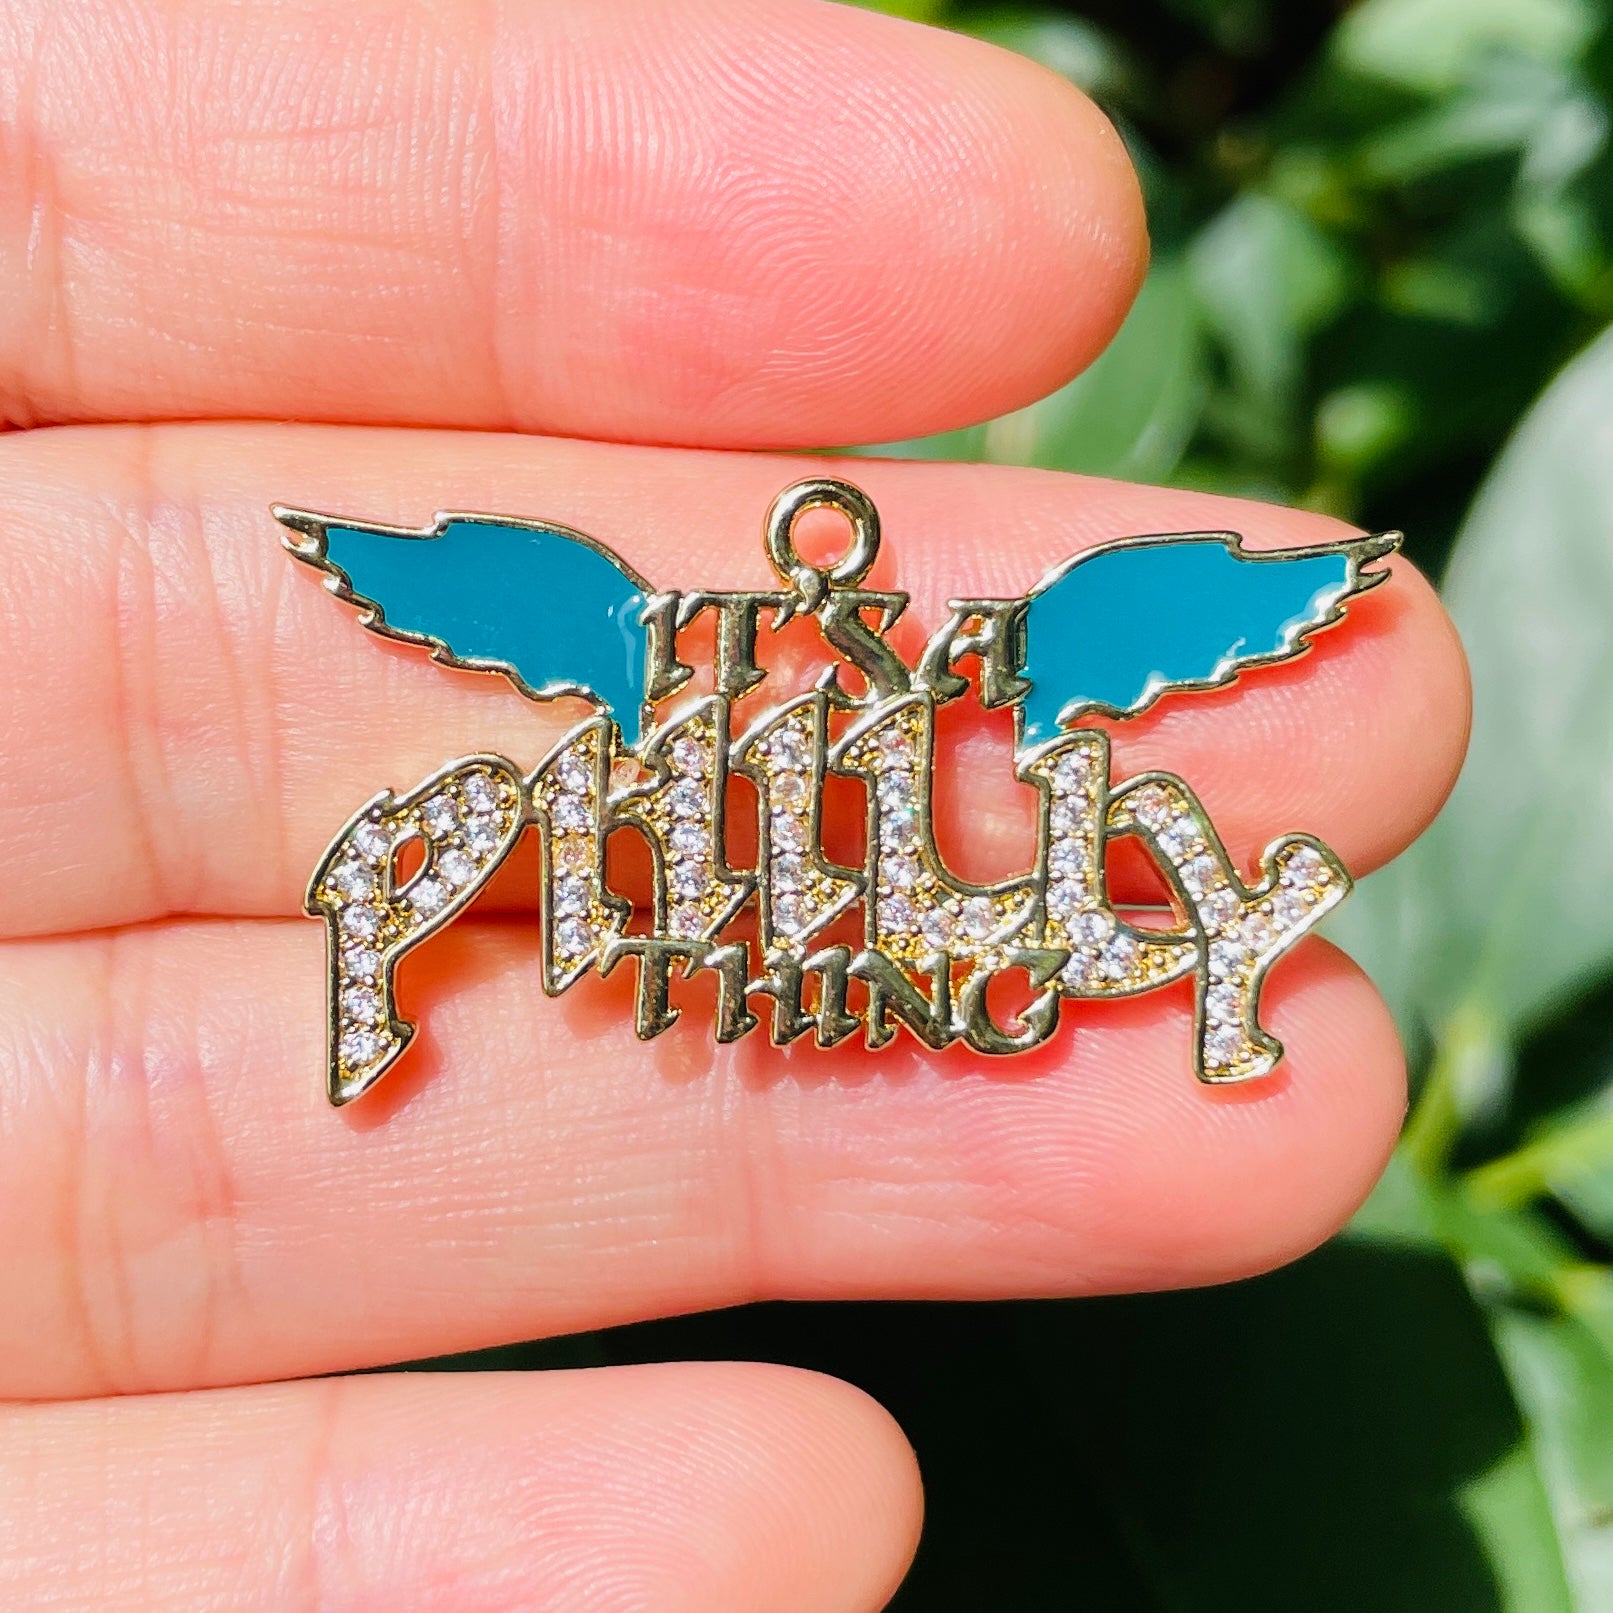 10pcs/lot CZ Paved "It is a Philly Thing" Word Philadelphia Eagles Charms CZ Paved Charms American Football Sports New Charms Arrivals Charms Beads Beyond